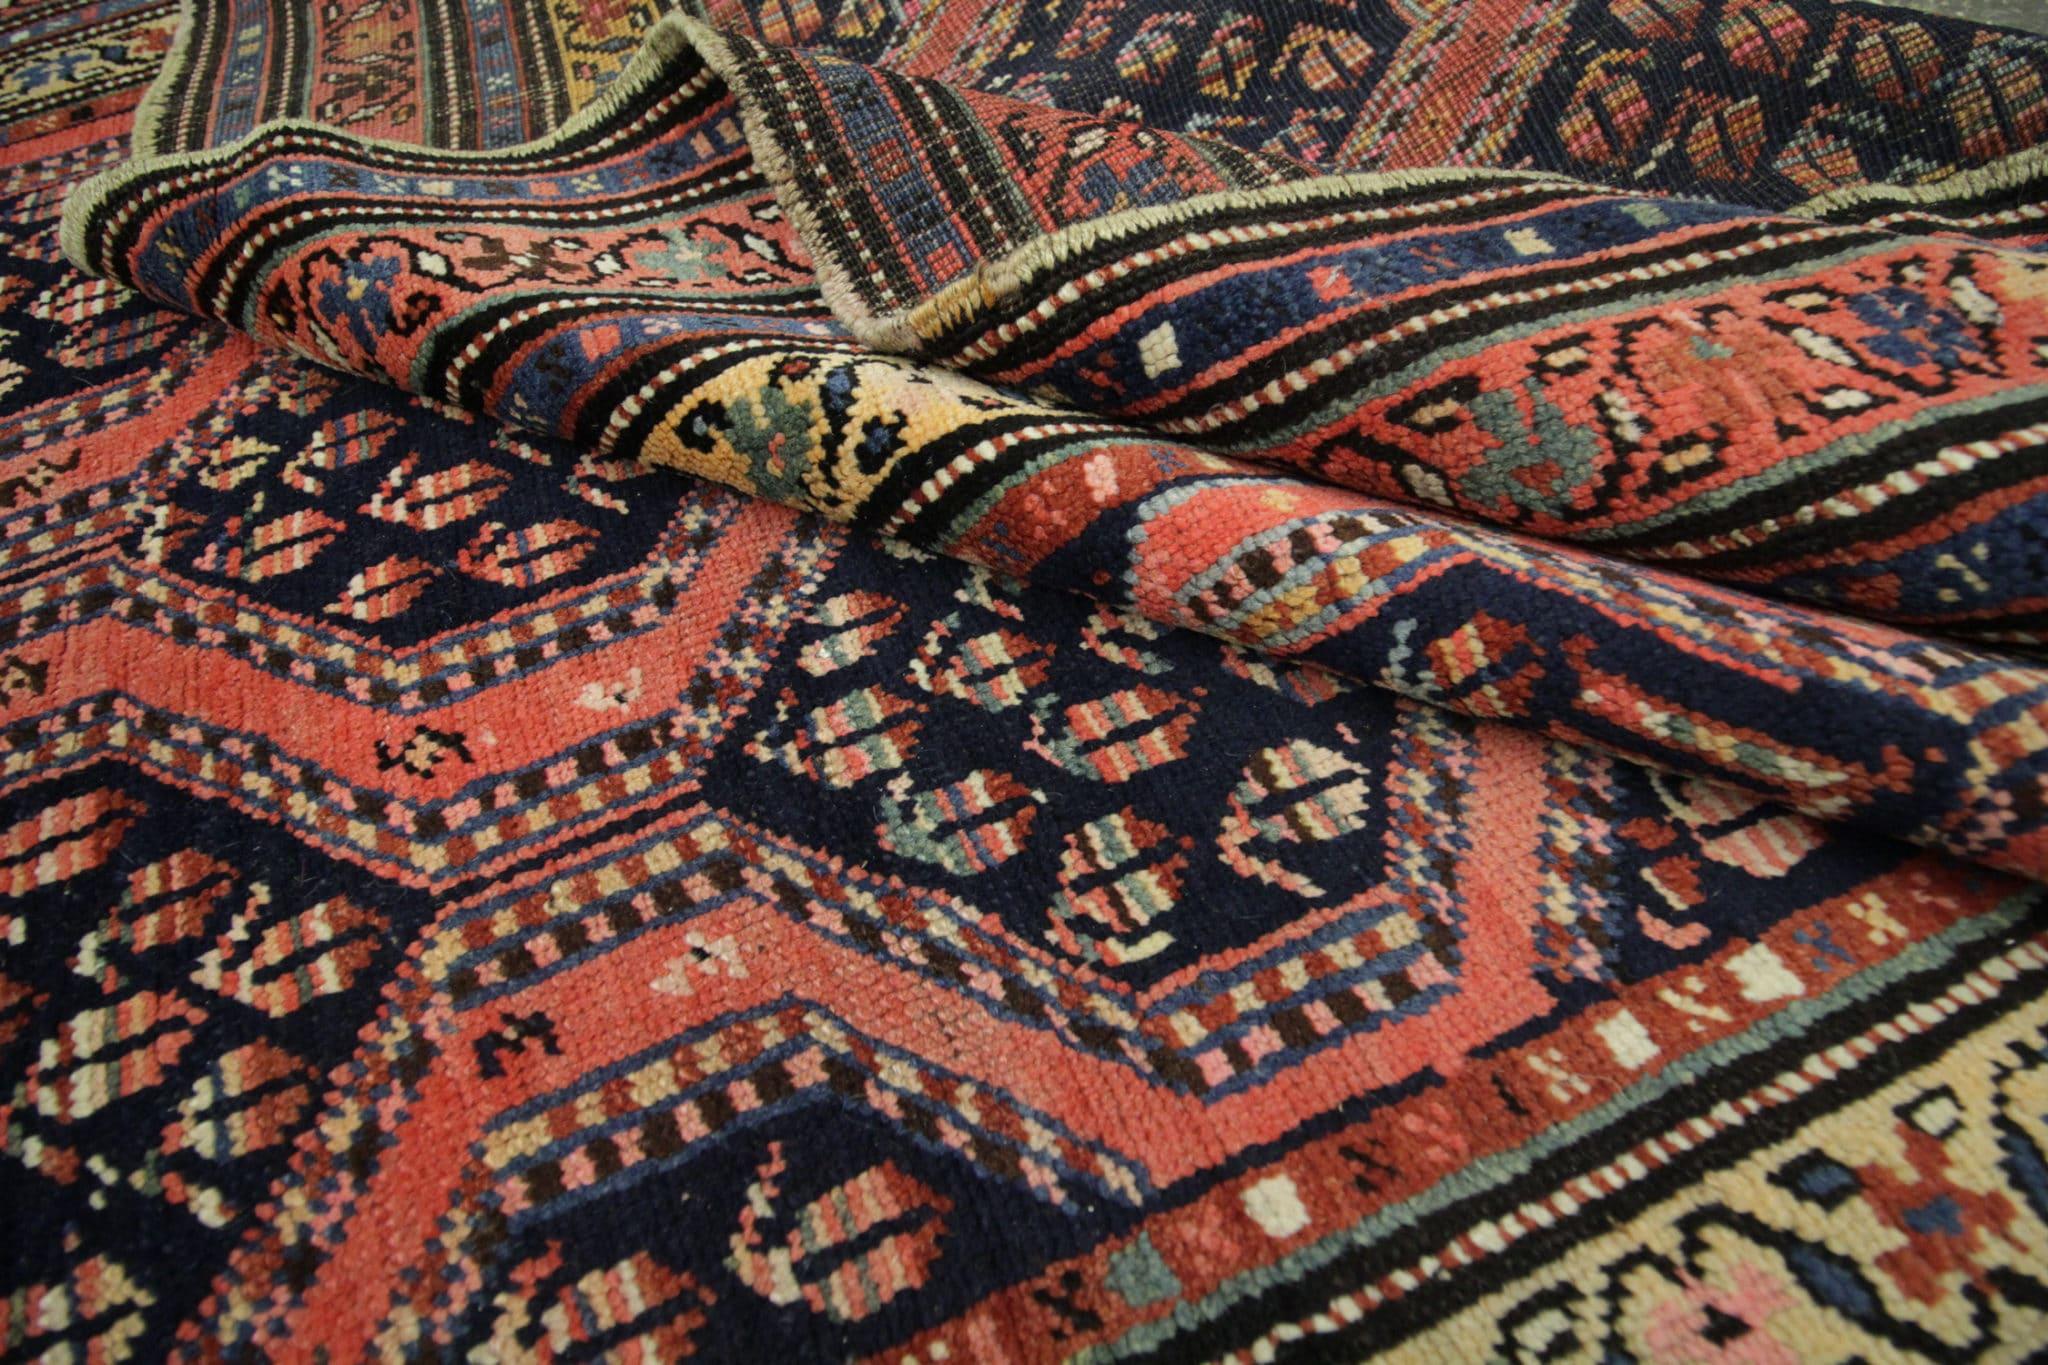 Rare Antique Rug Caucasian Rug Karabagh Handmade Carpet Oriental Rugs for Sale In Excellent Condition For Sale In Hampshire, GB